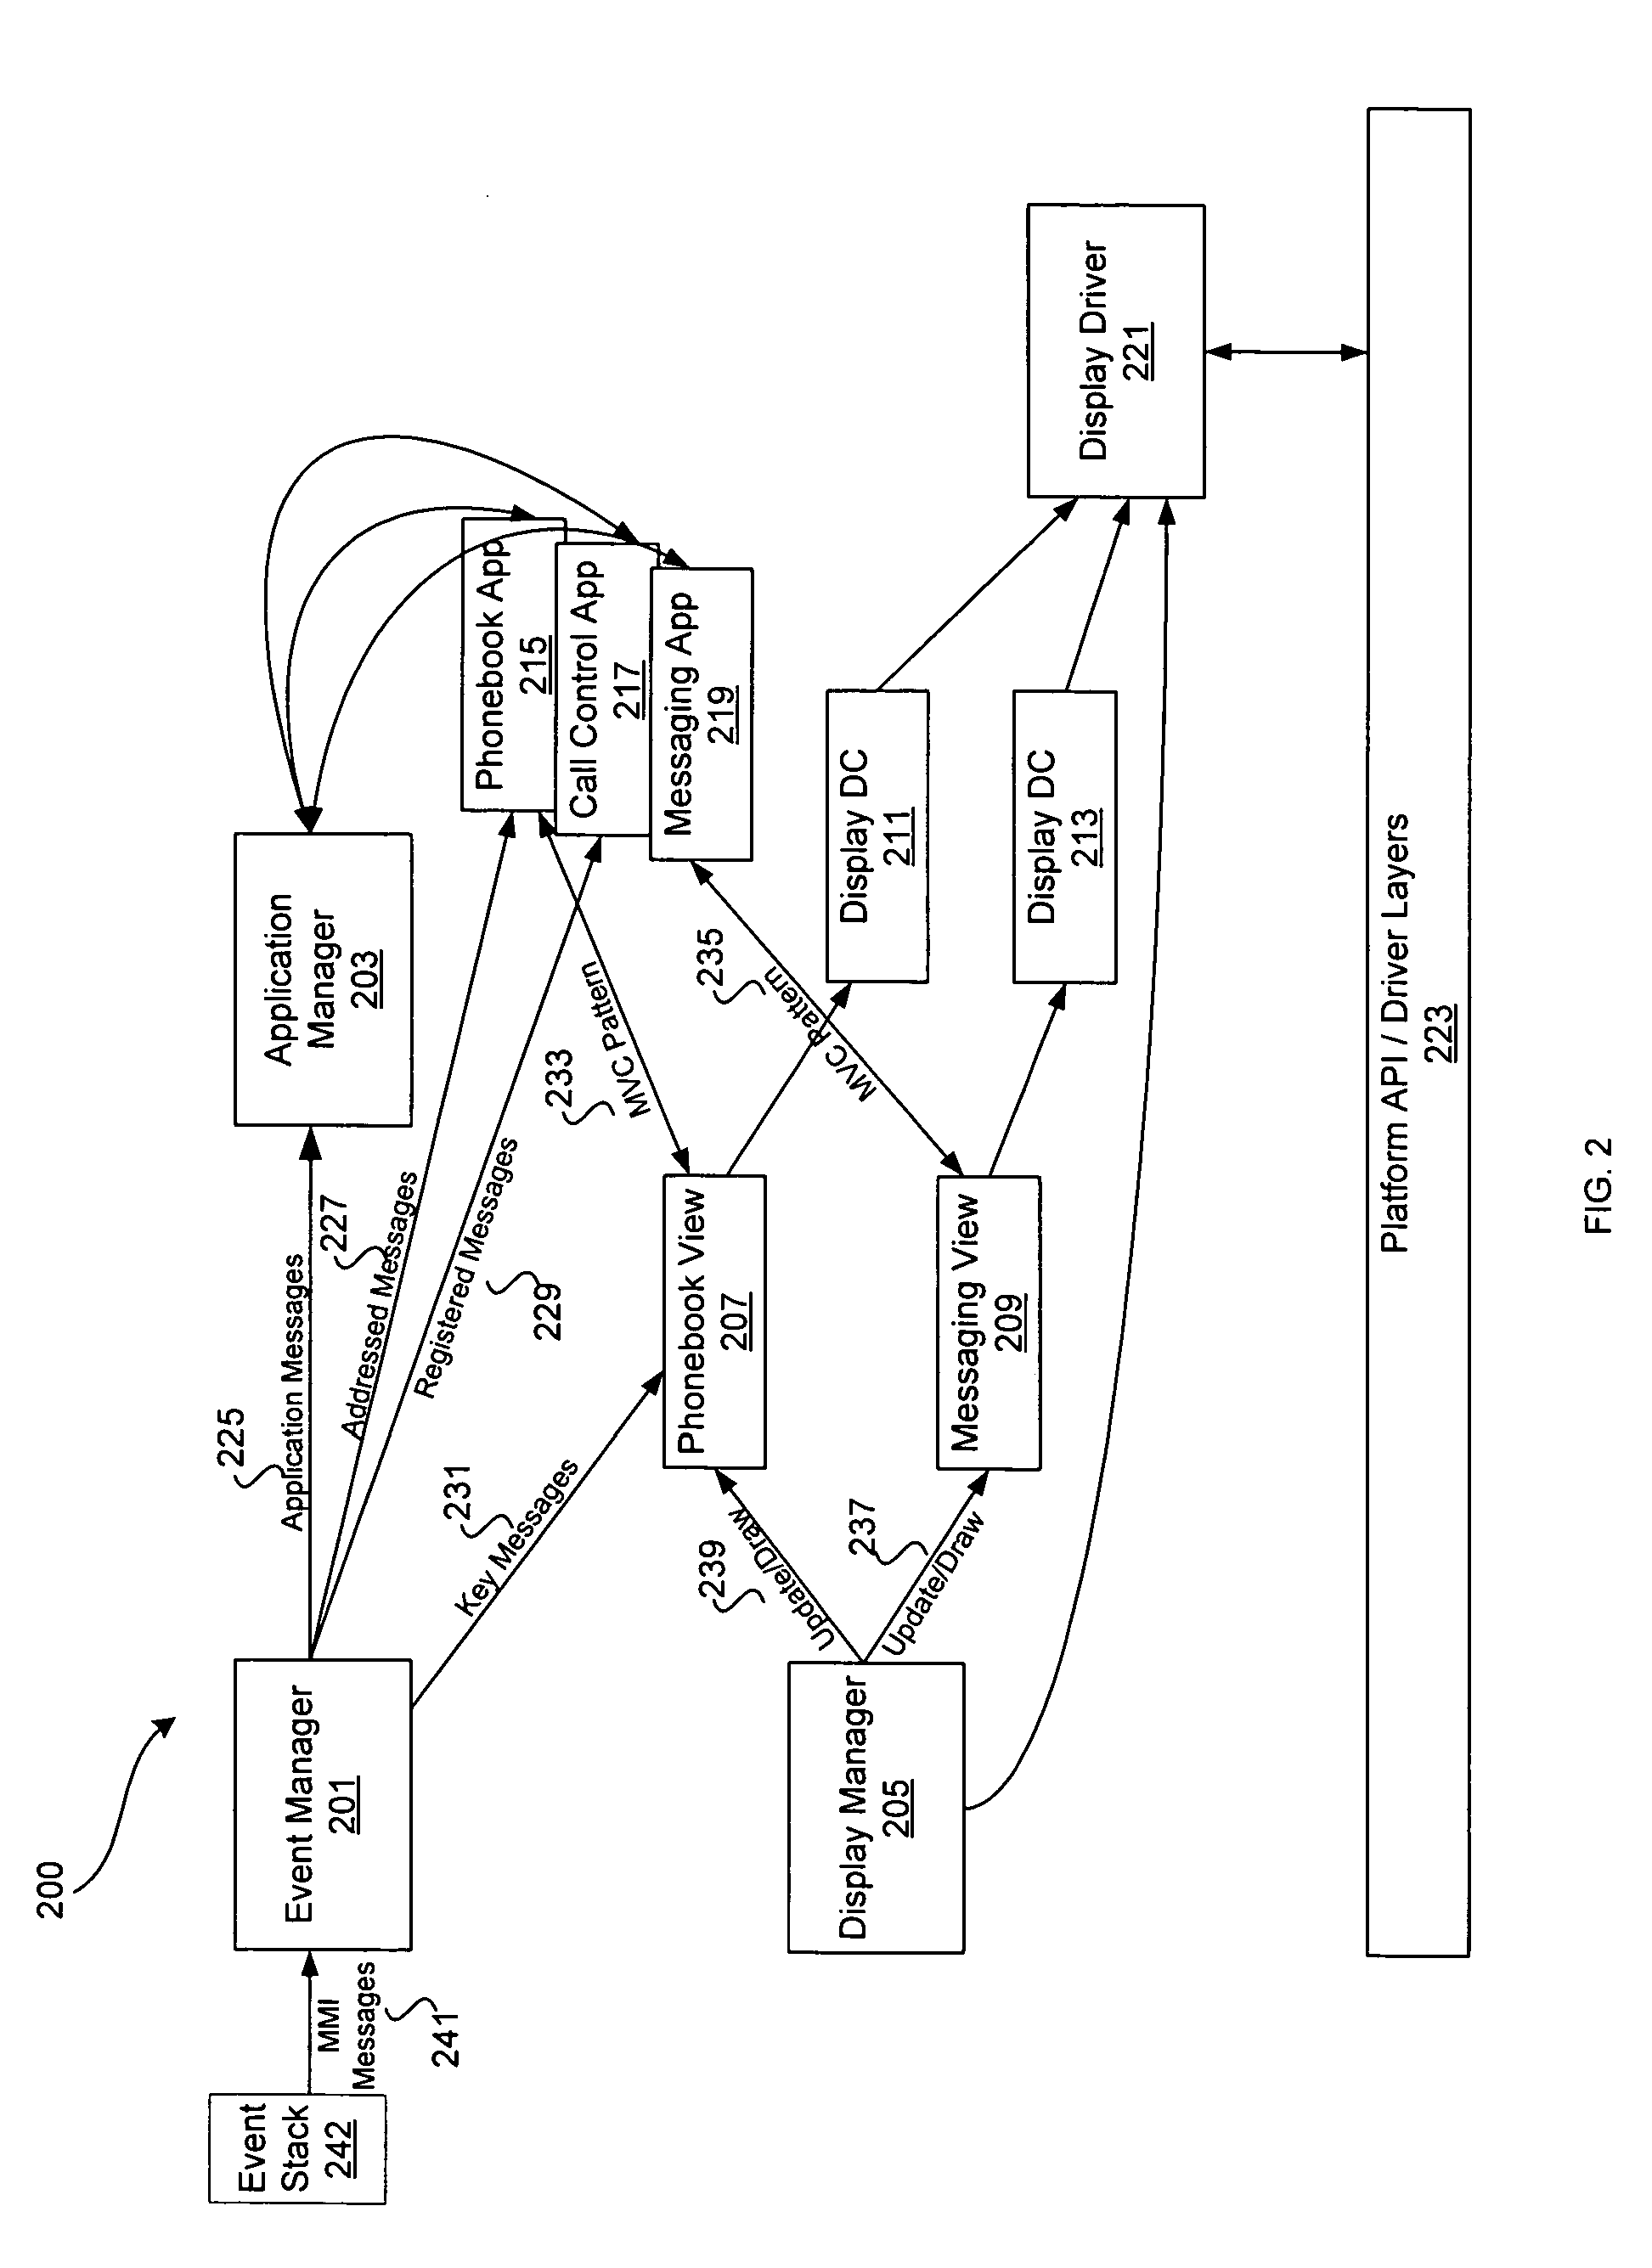 Method and system for an application framework for a wireless device